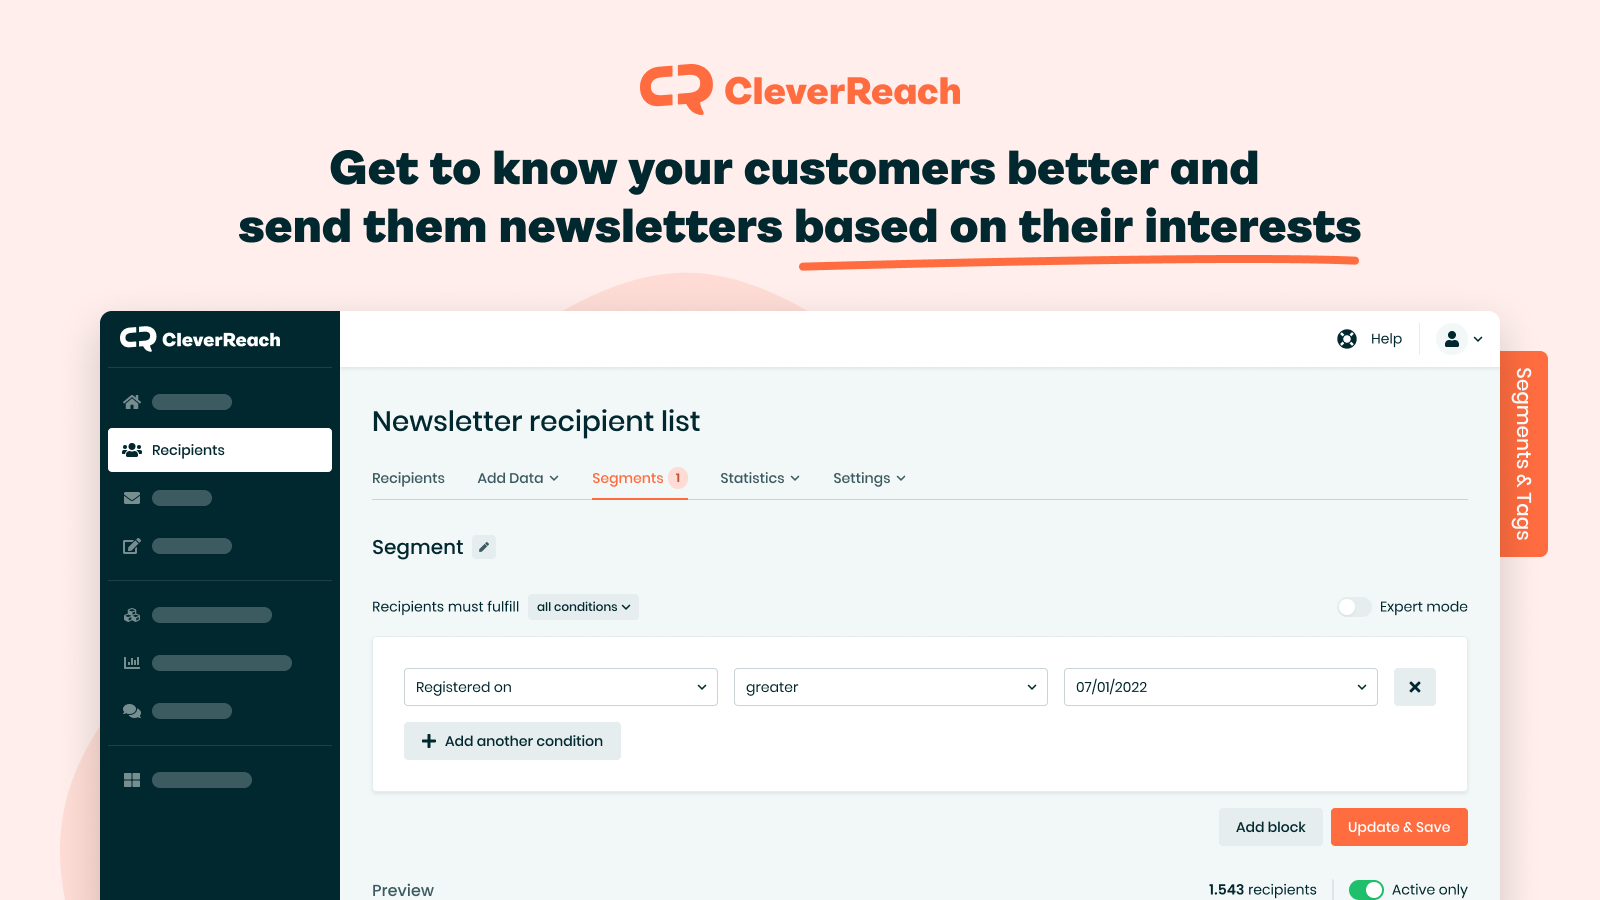 Send your customers newsletters based on their interests